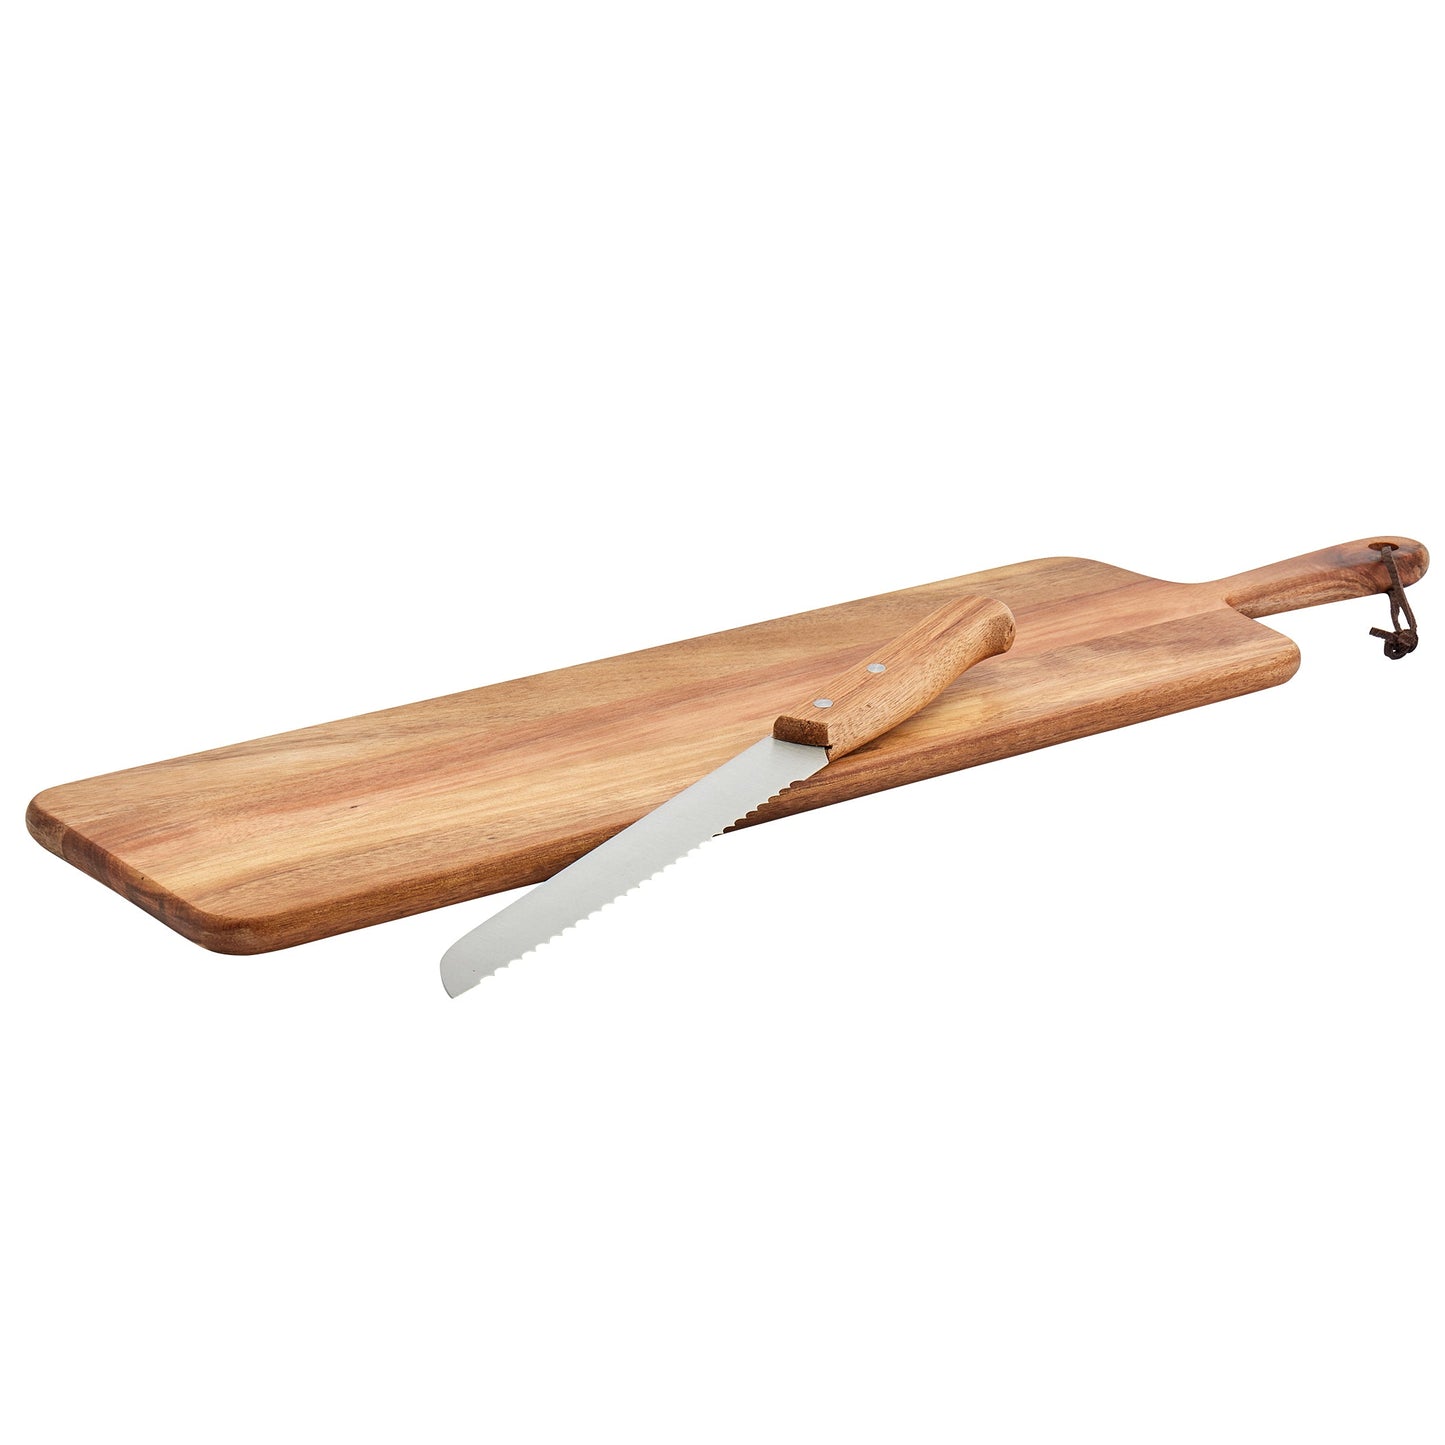 8" SLICING KNIFE WITH SERVE BOARD